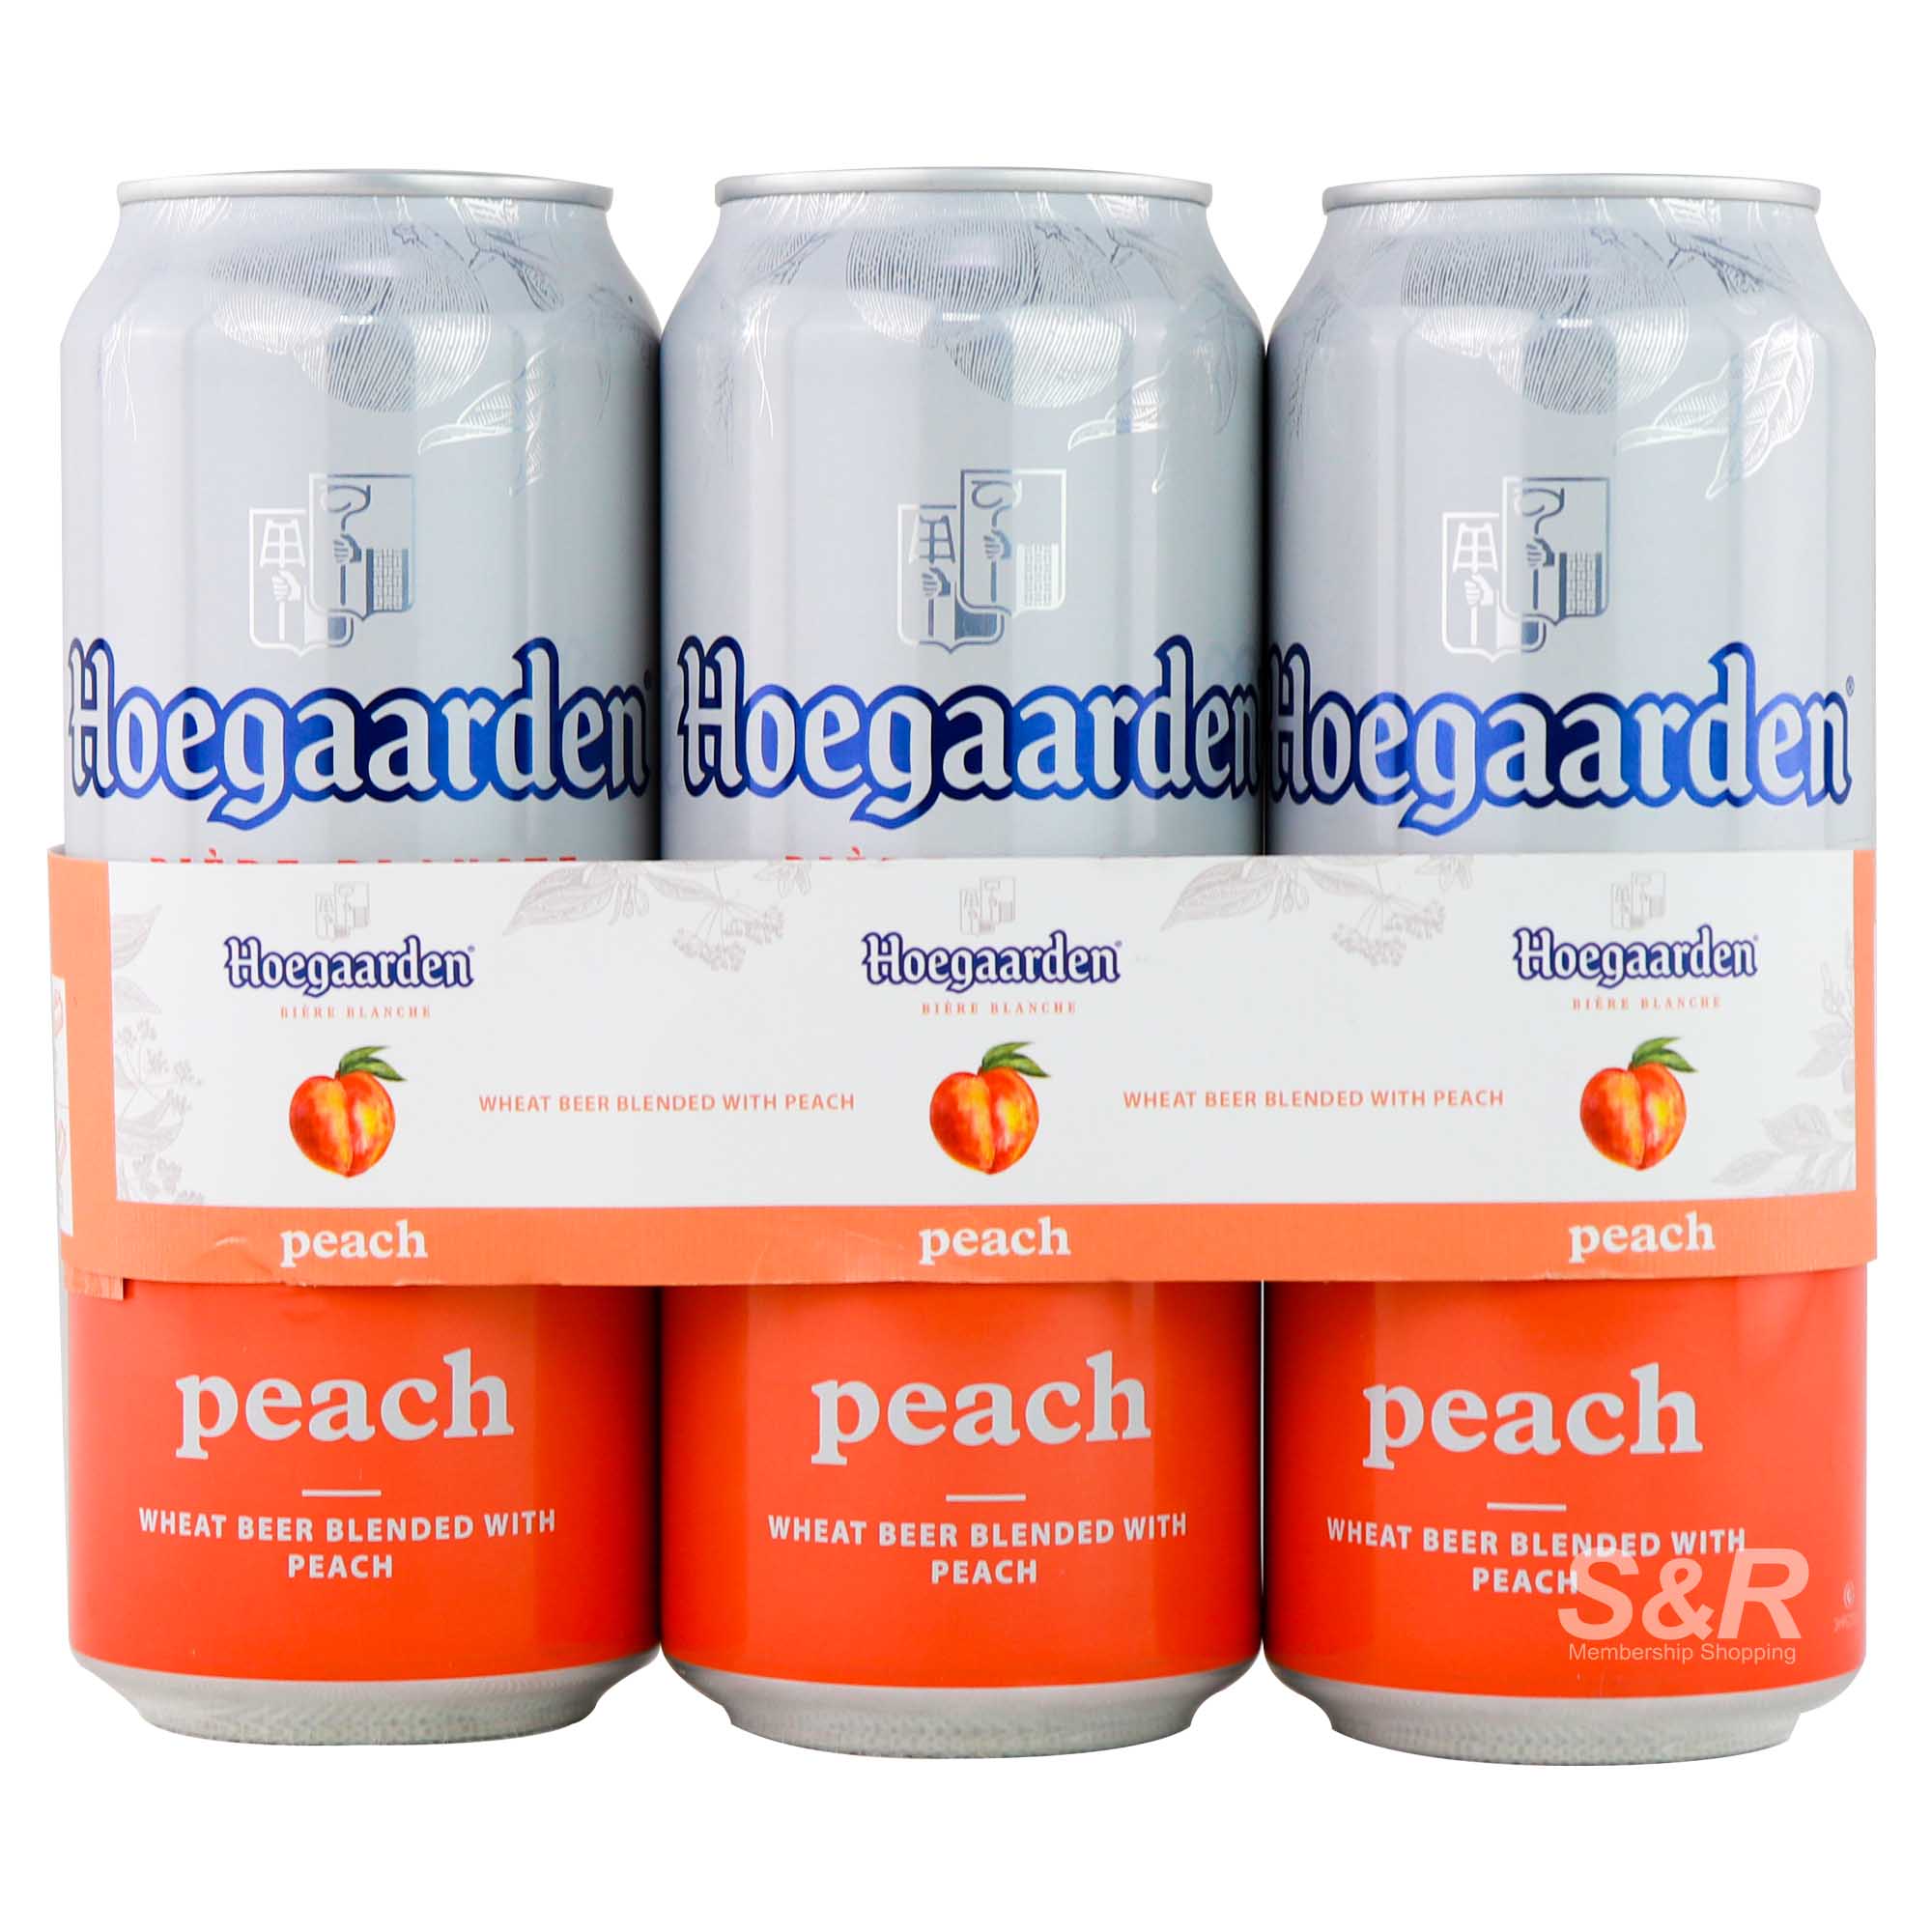 Hoegaarden Wheat Beer Blended with Peach 3 cans